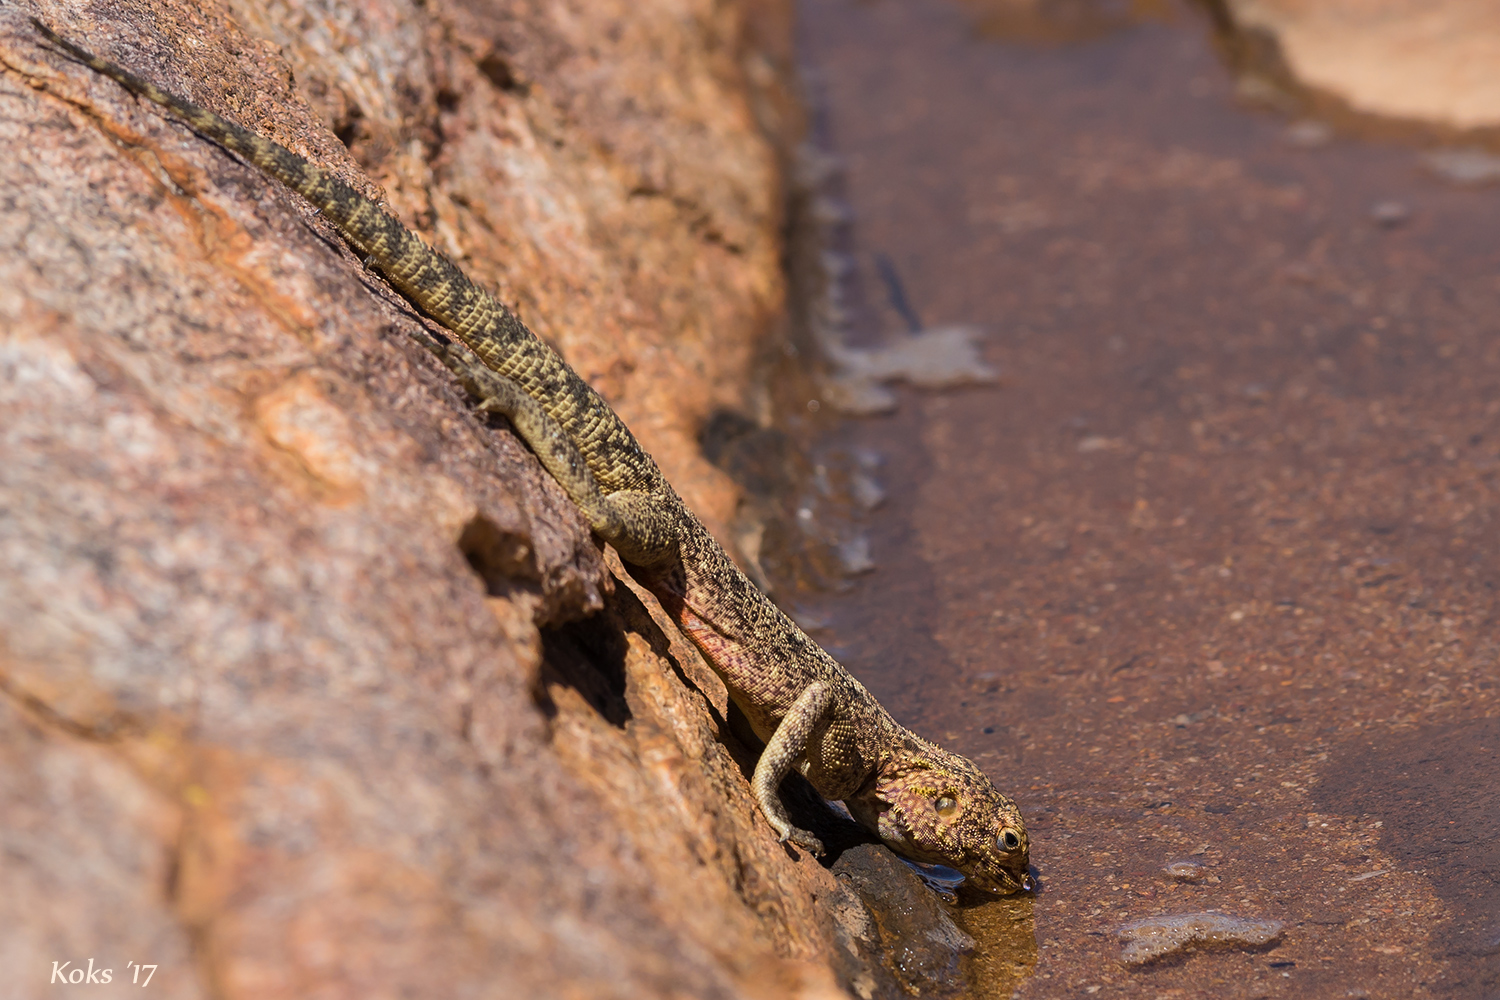 Southern rock agama